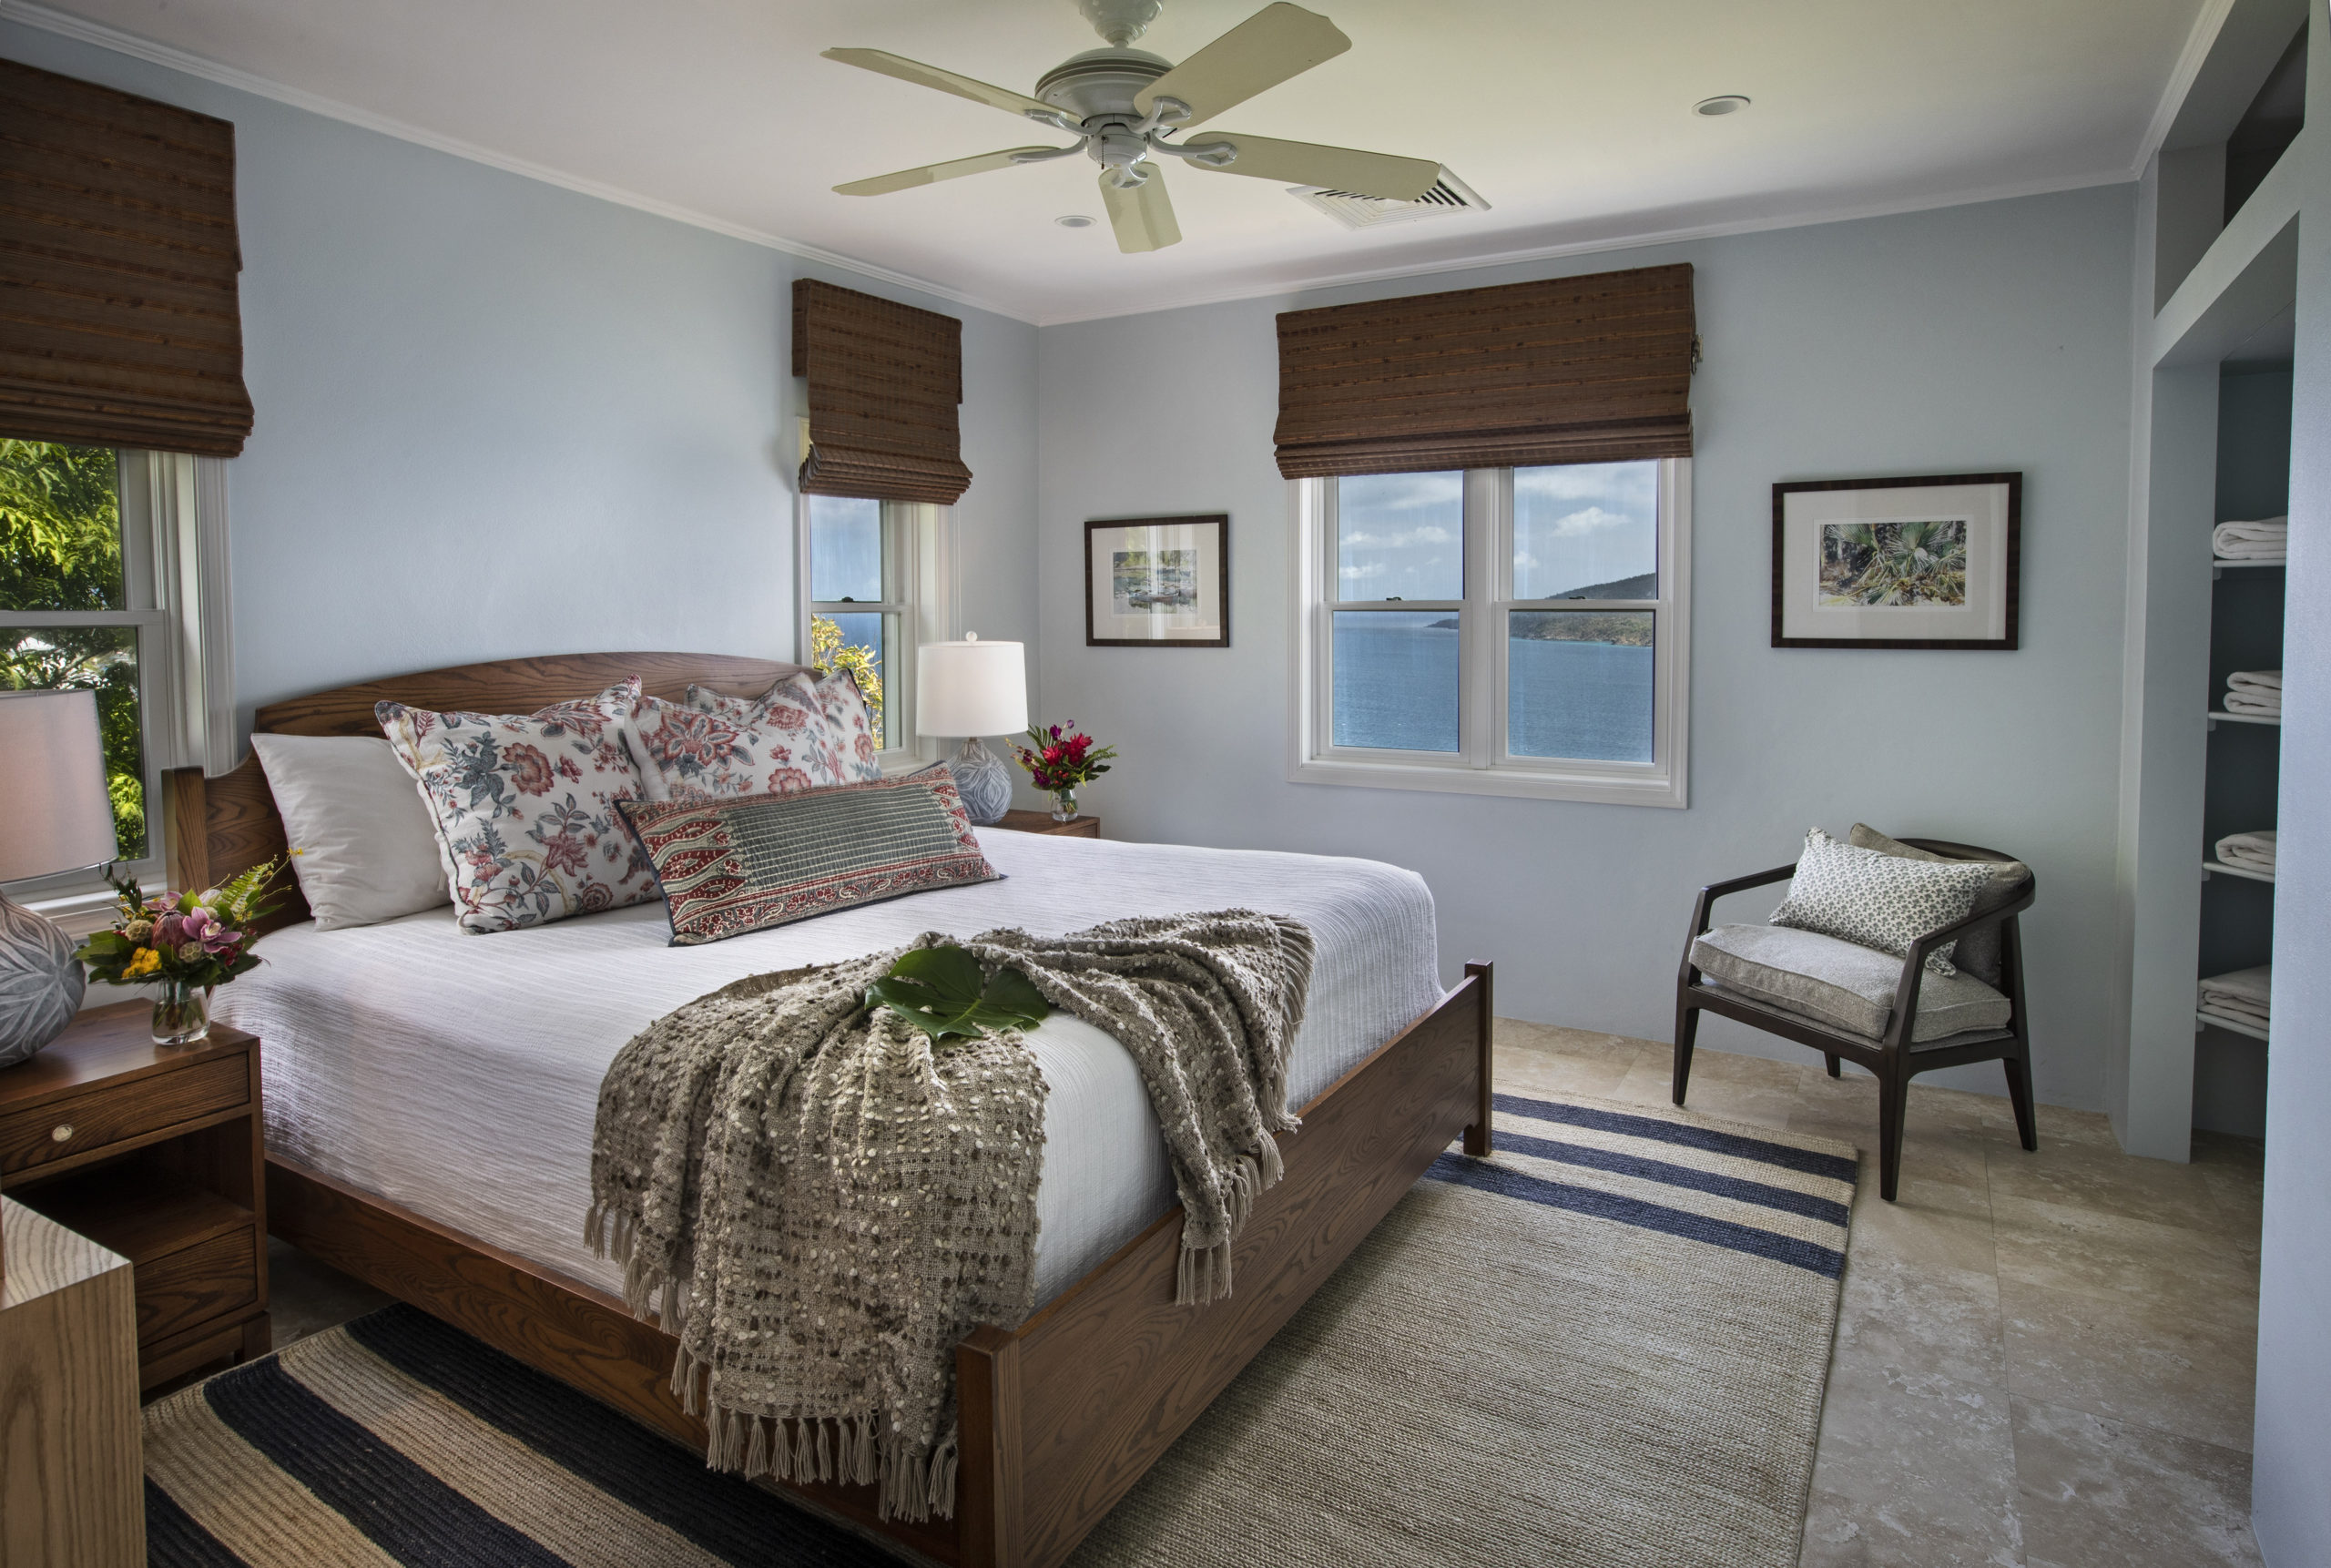 Guest room with a mahogany bed and annie selkie easy care bedding. Bamboo blinds from Horizon. Bedroom has ocean views and views of Hans Lollick